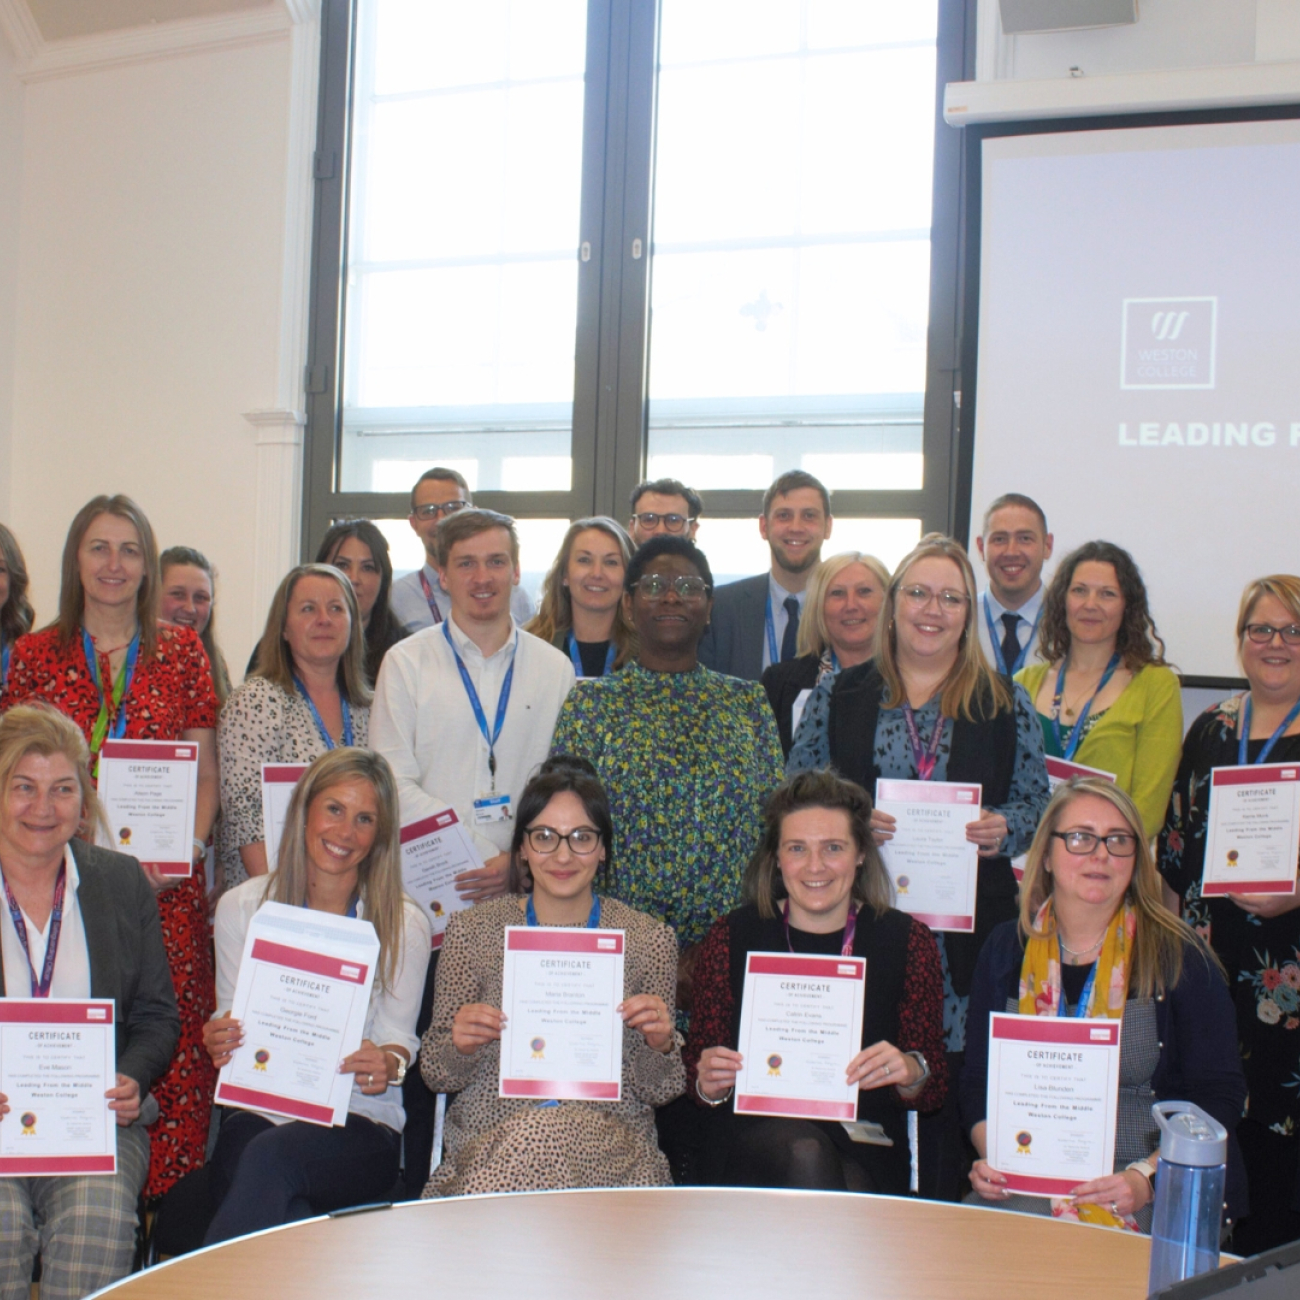 Staff with Certificates from Management Course